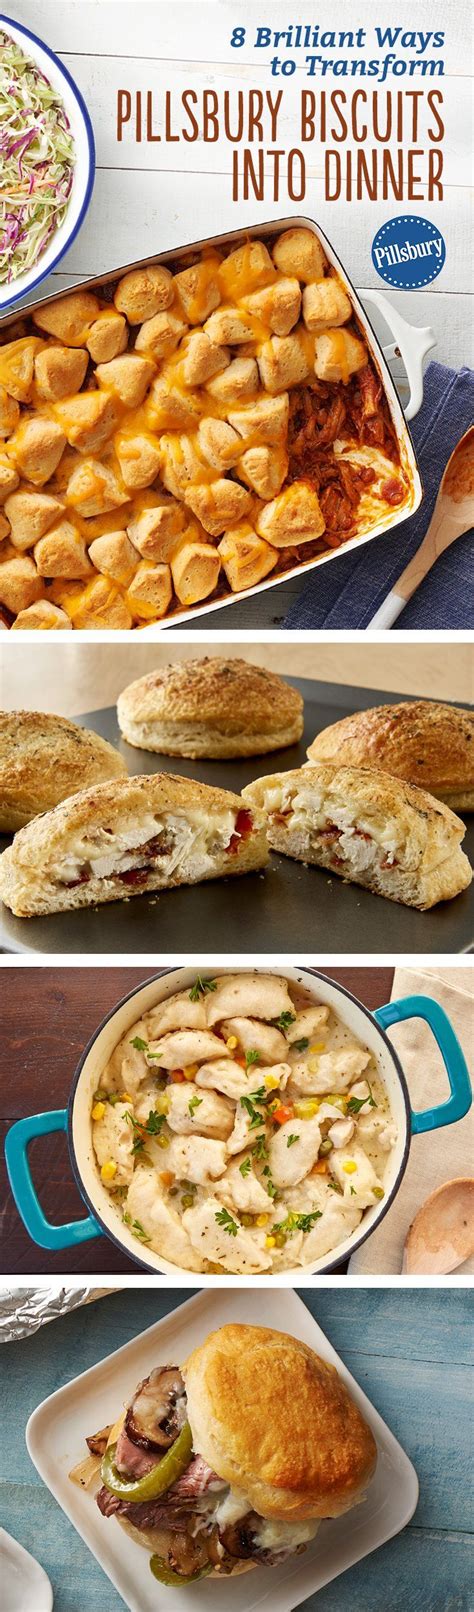 These 55 easy dinner recipes that require minimal effort (or fancy chef skills) and taste delicious. 9 Ways to Transform Pillsbury Biscuits into Dinner | Meals ...